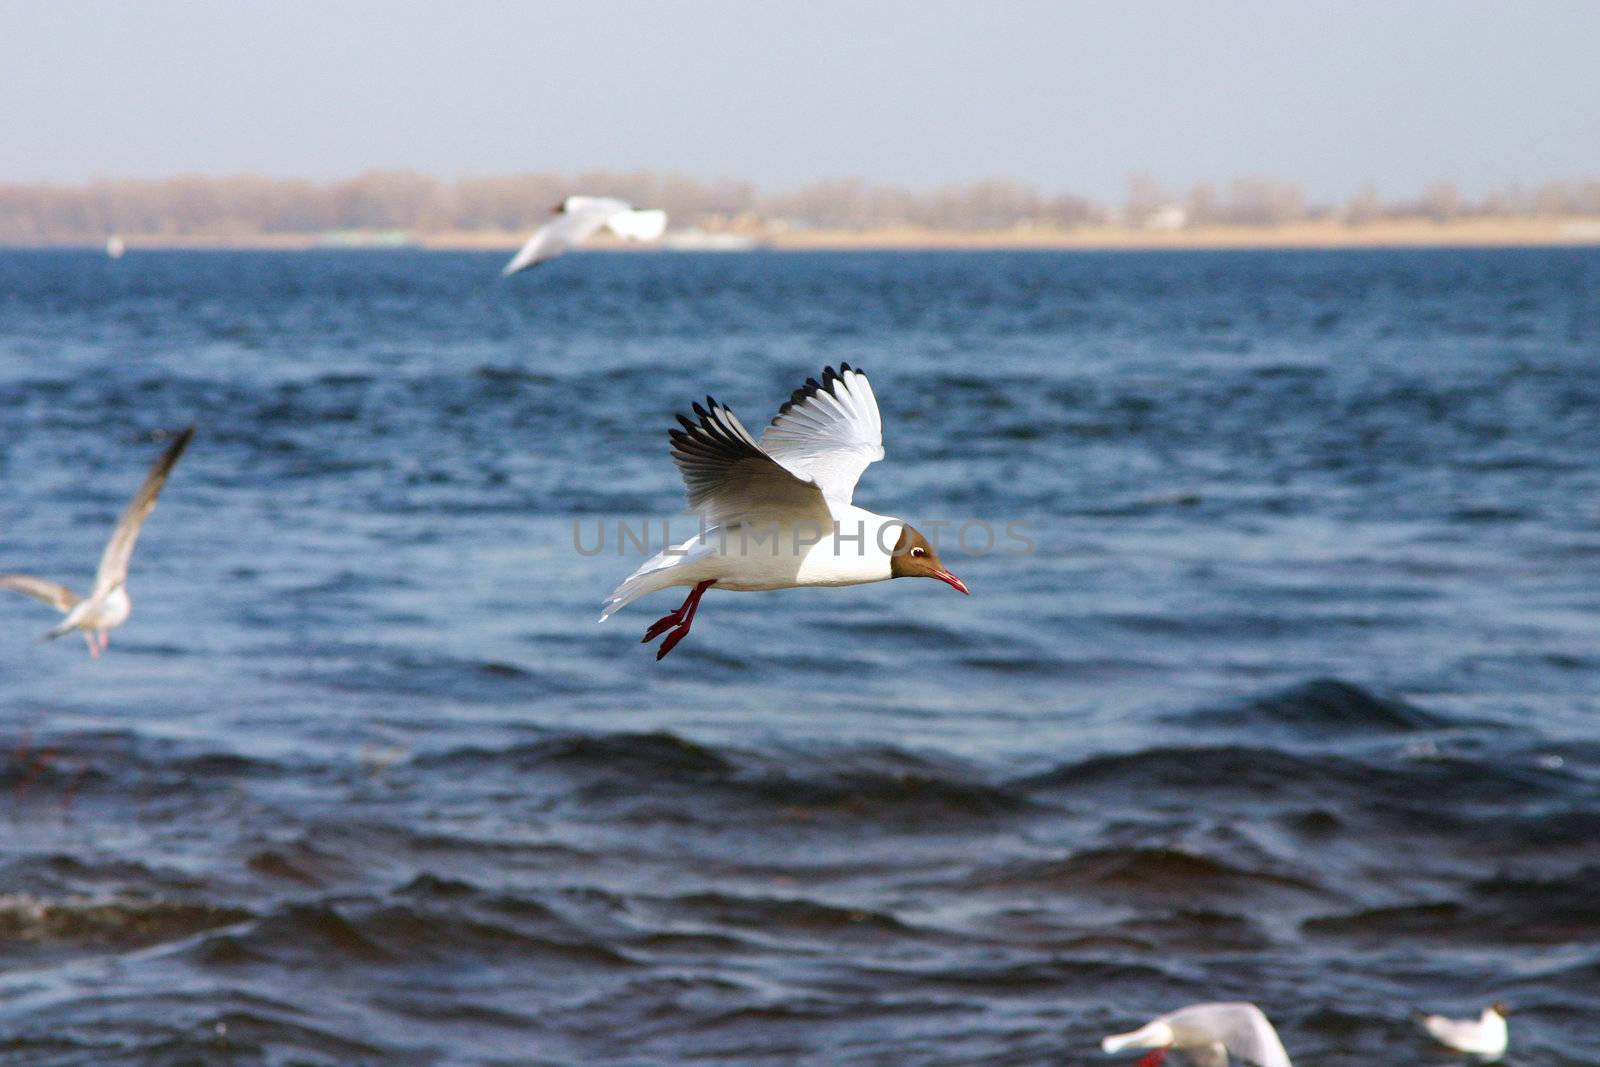 The seagull flies above the black sea